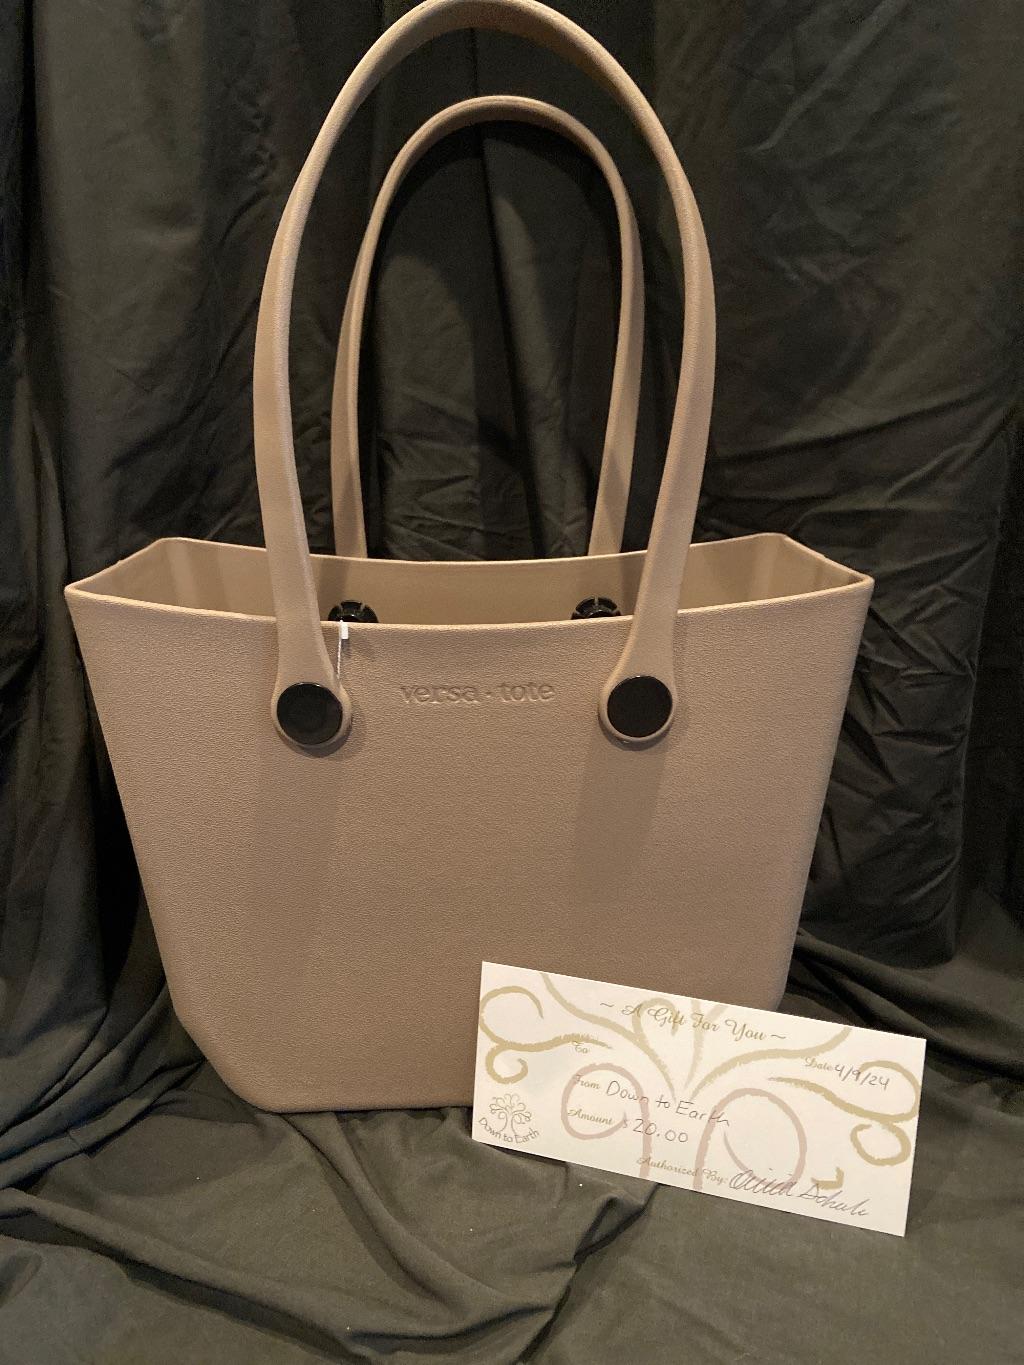 Down to Earth $20 Gift Certificate with Versa Tote